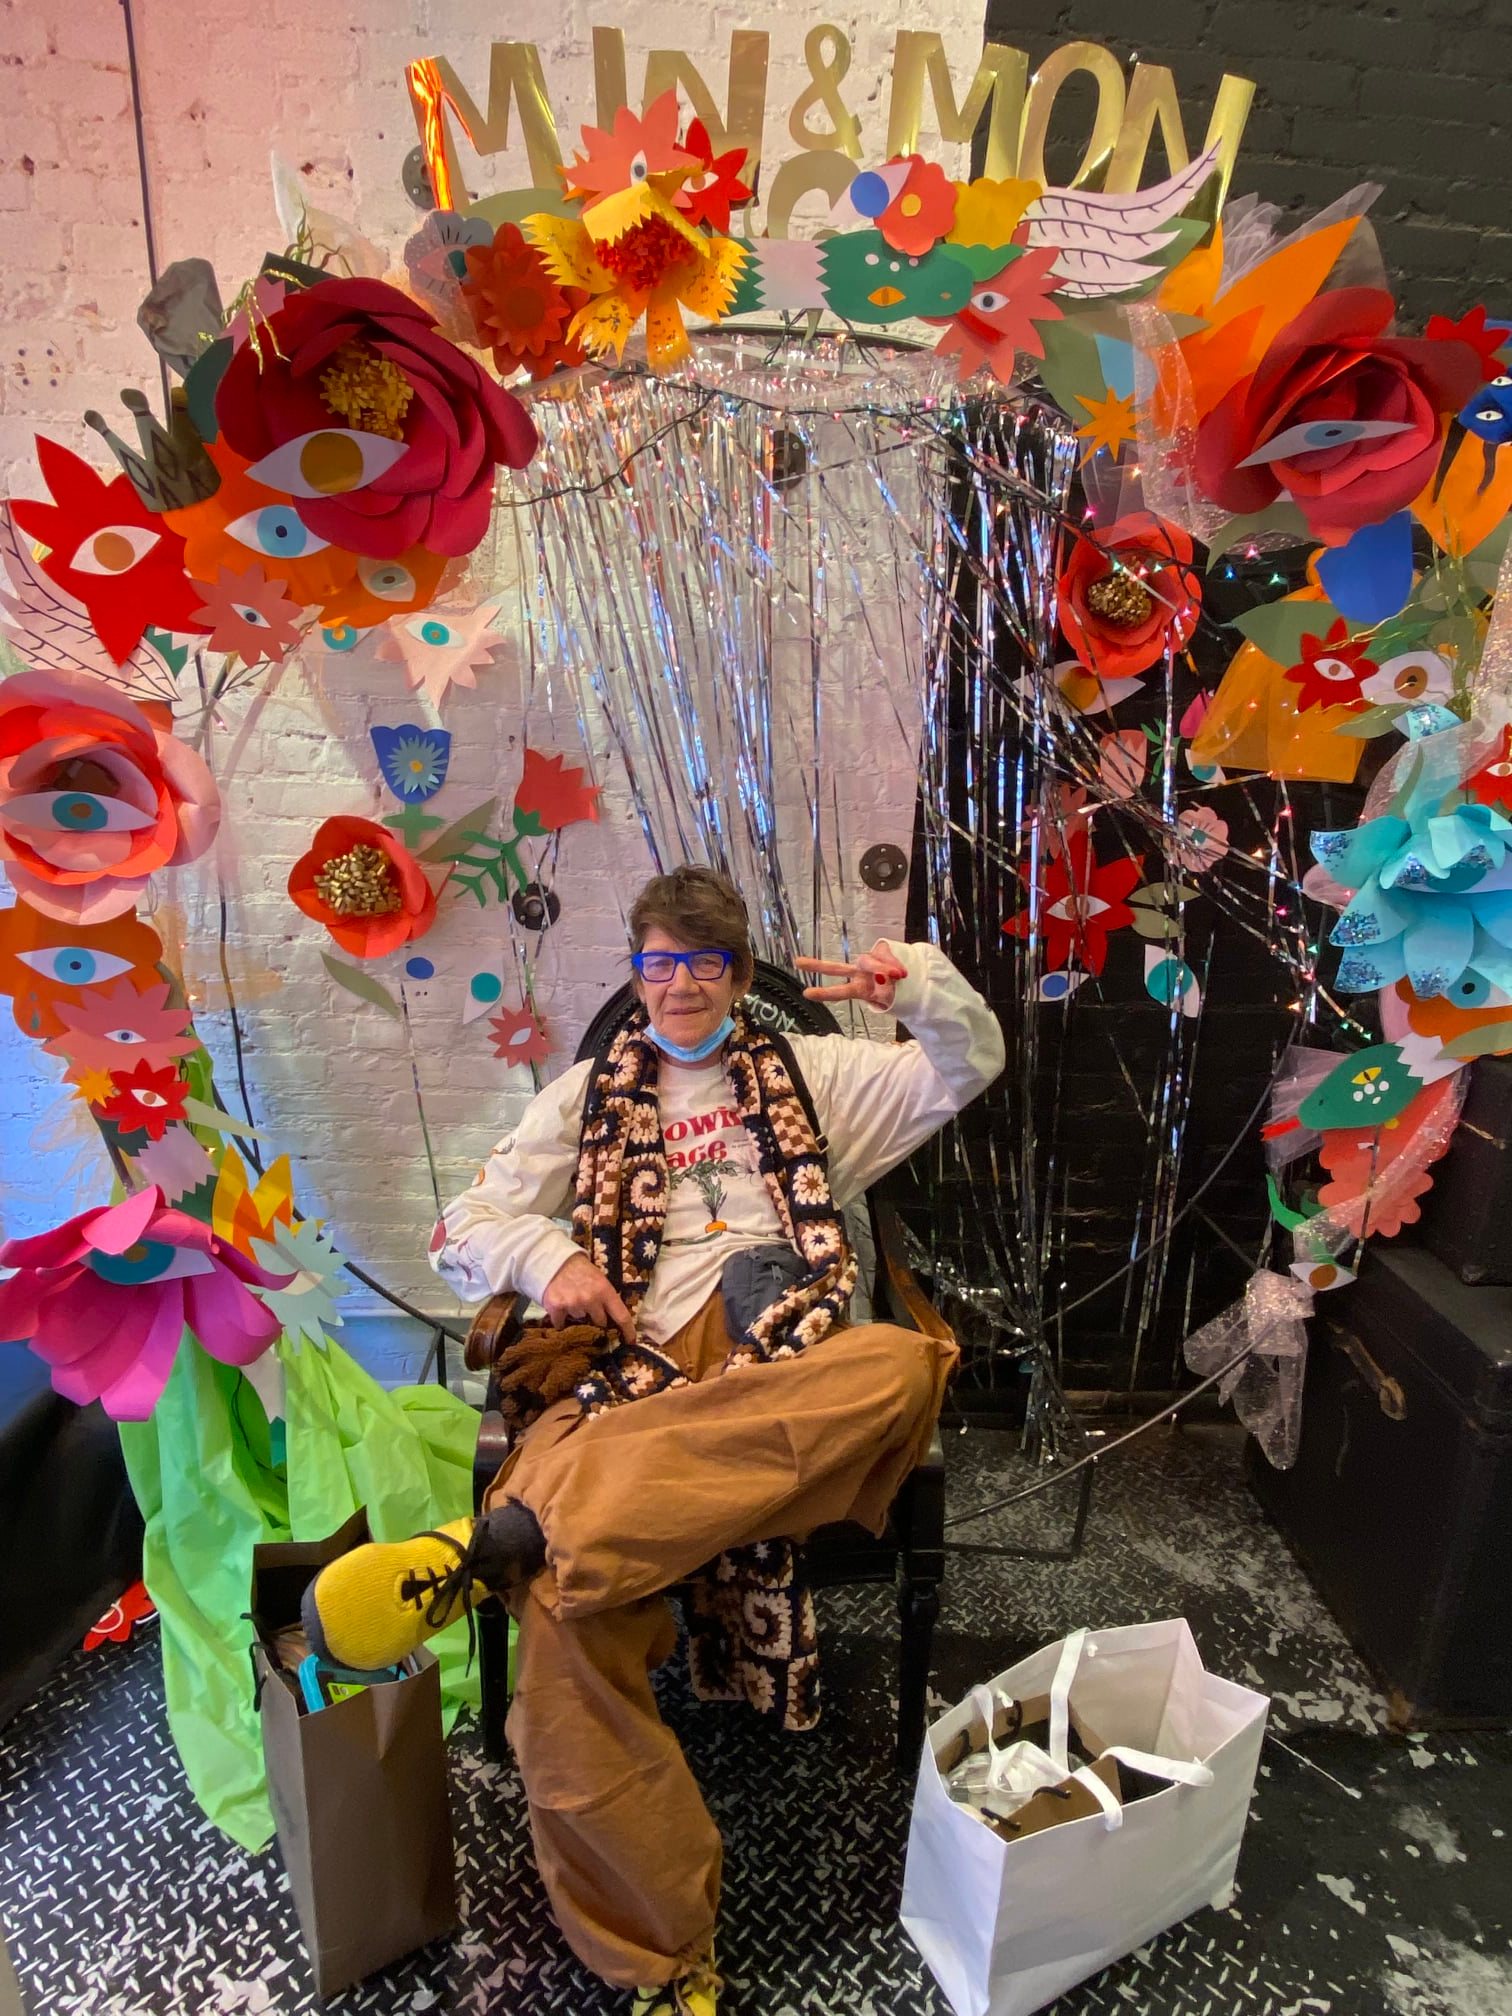 a woman named patti o'malley giving a peace sign as she sits in a chair that's surrounded by colorful decorations